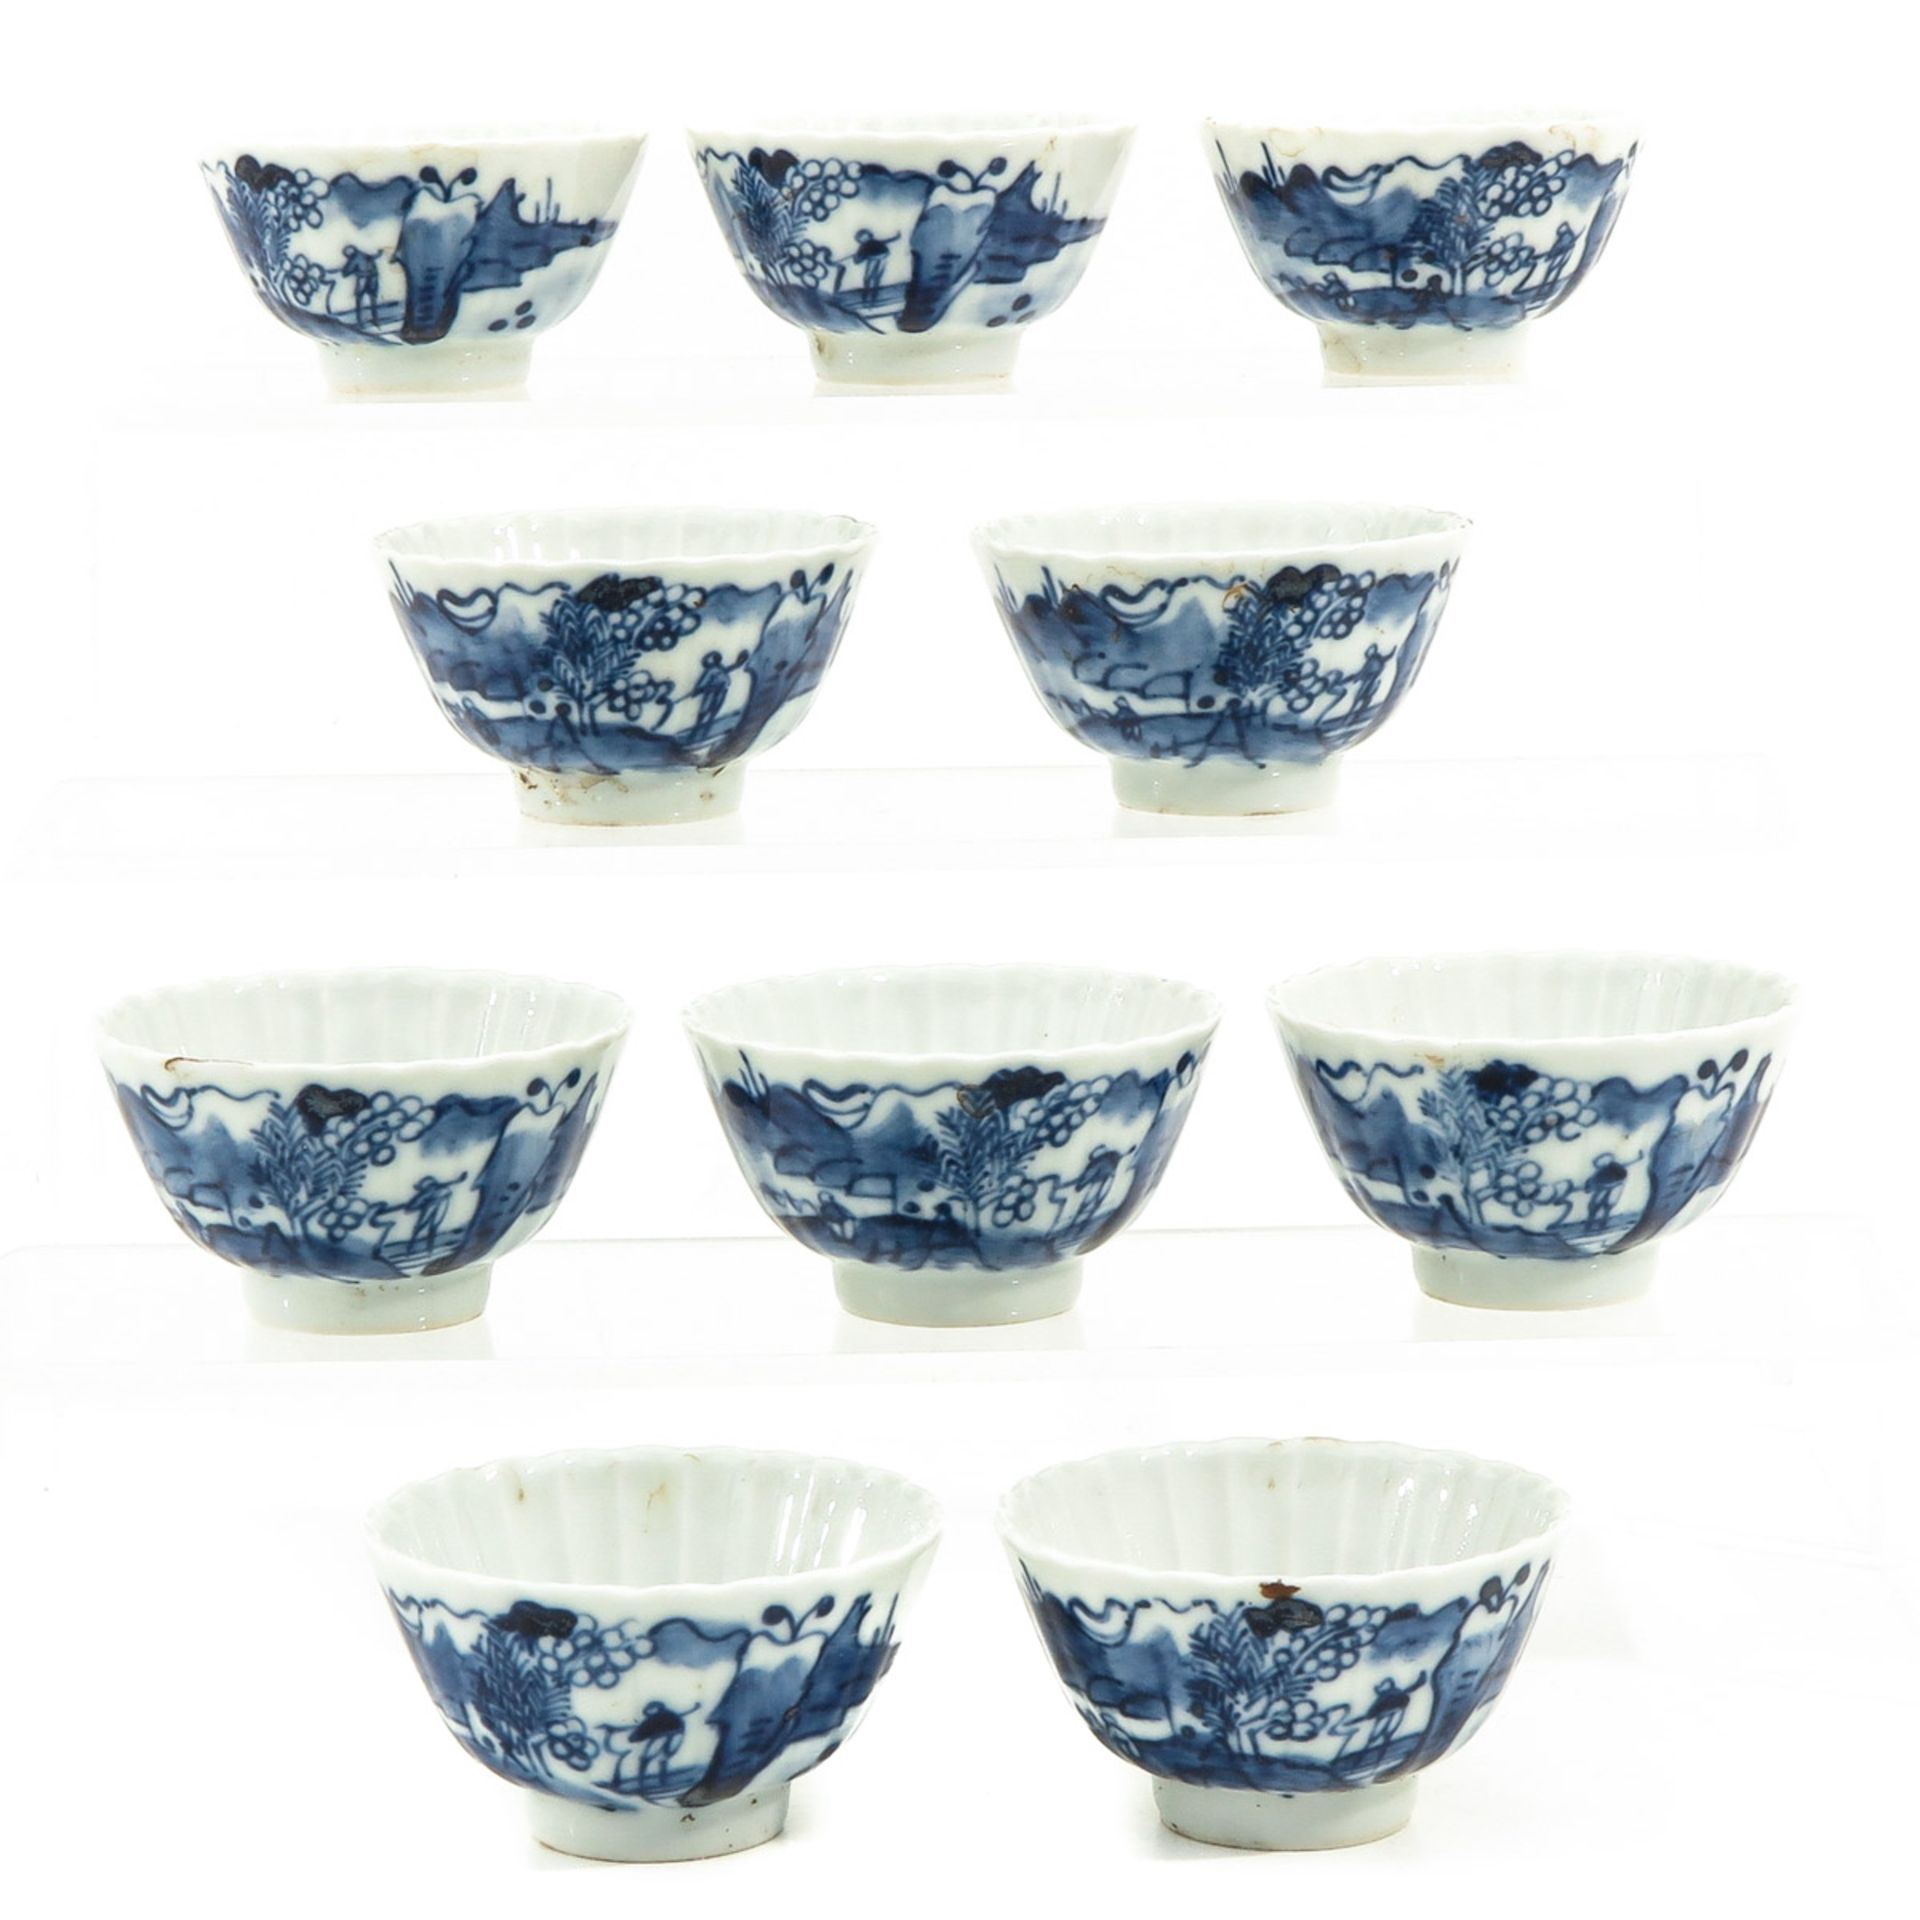 A Series of 10 Blue and White Cups